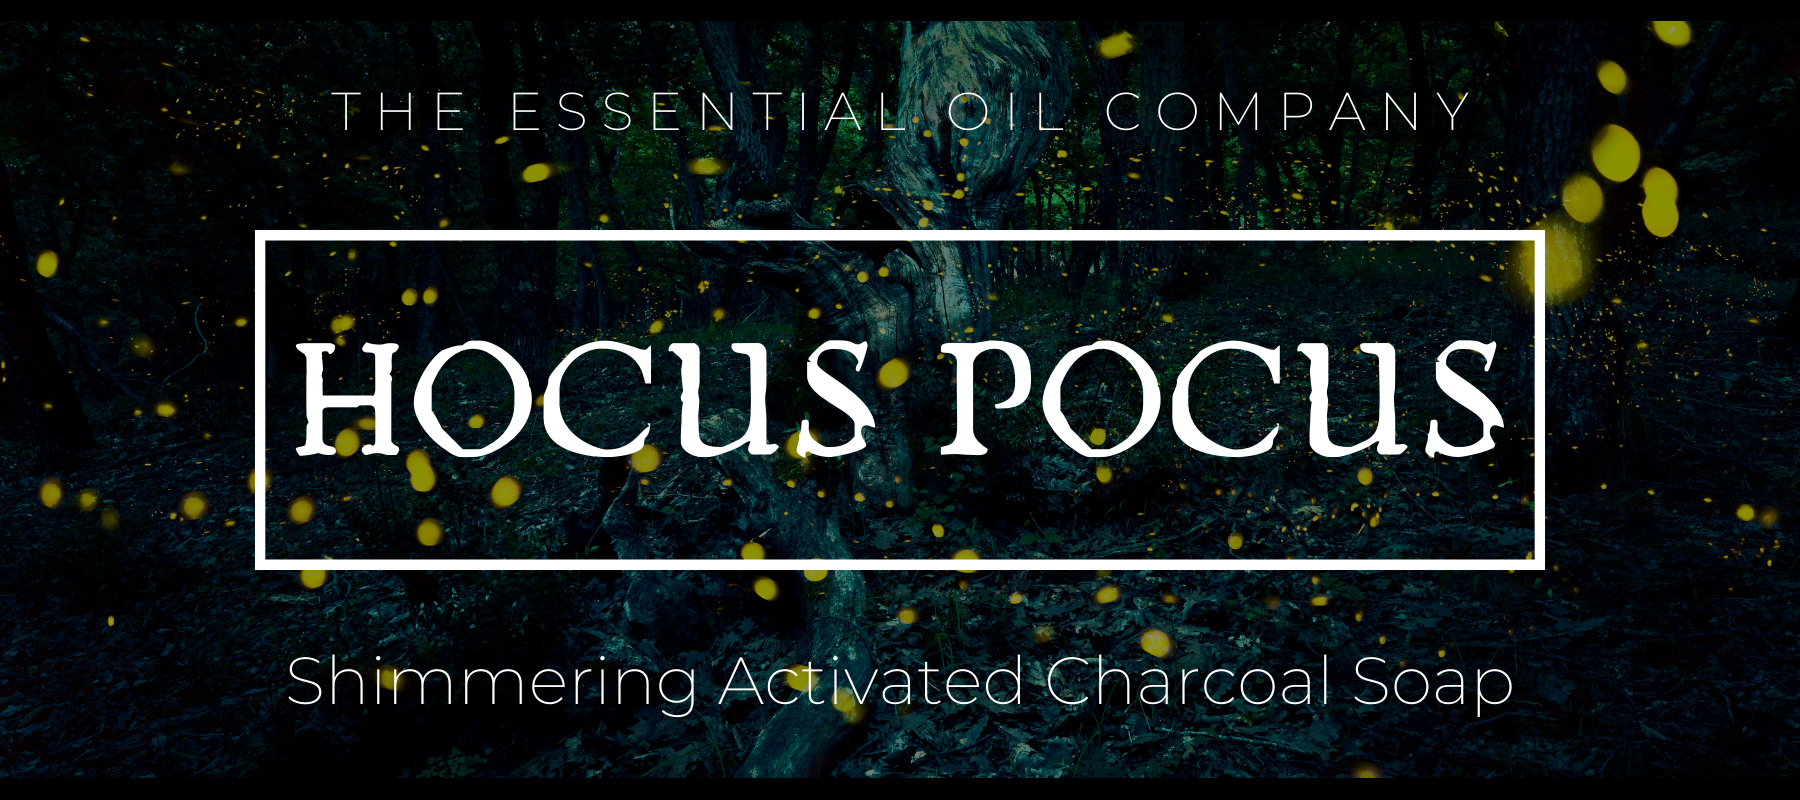 Hocus Pocus: Shimmering Activated Charcoal Soap